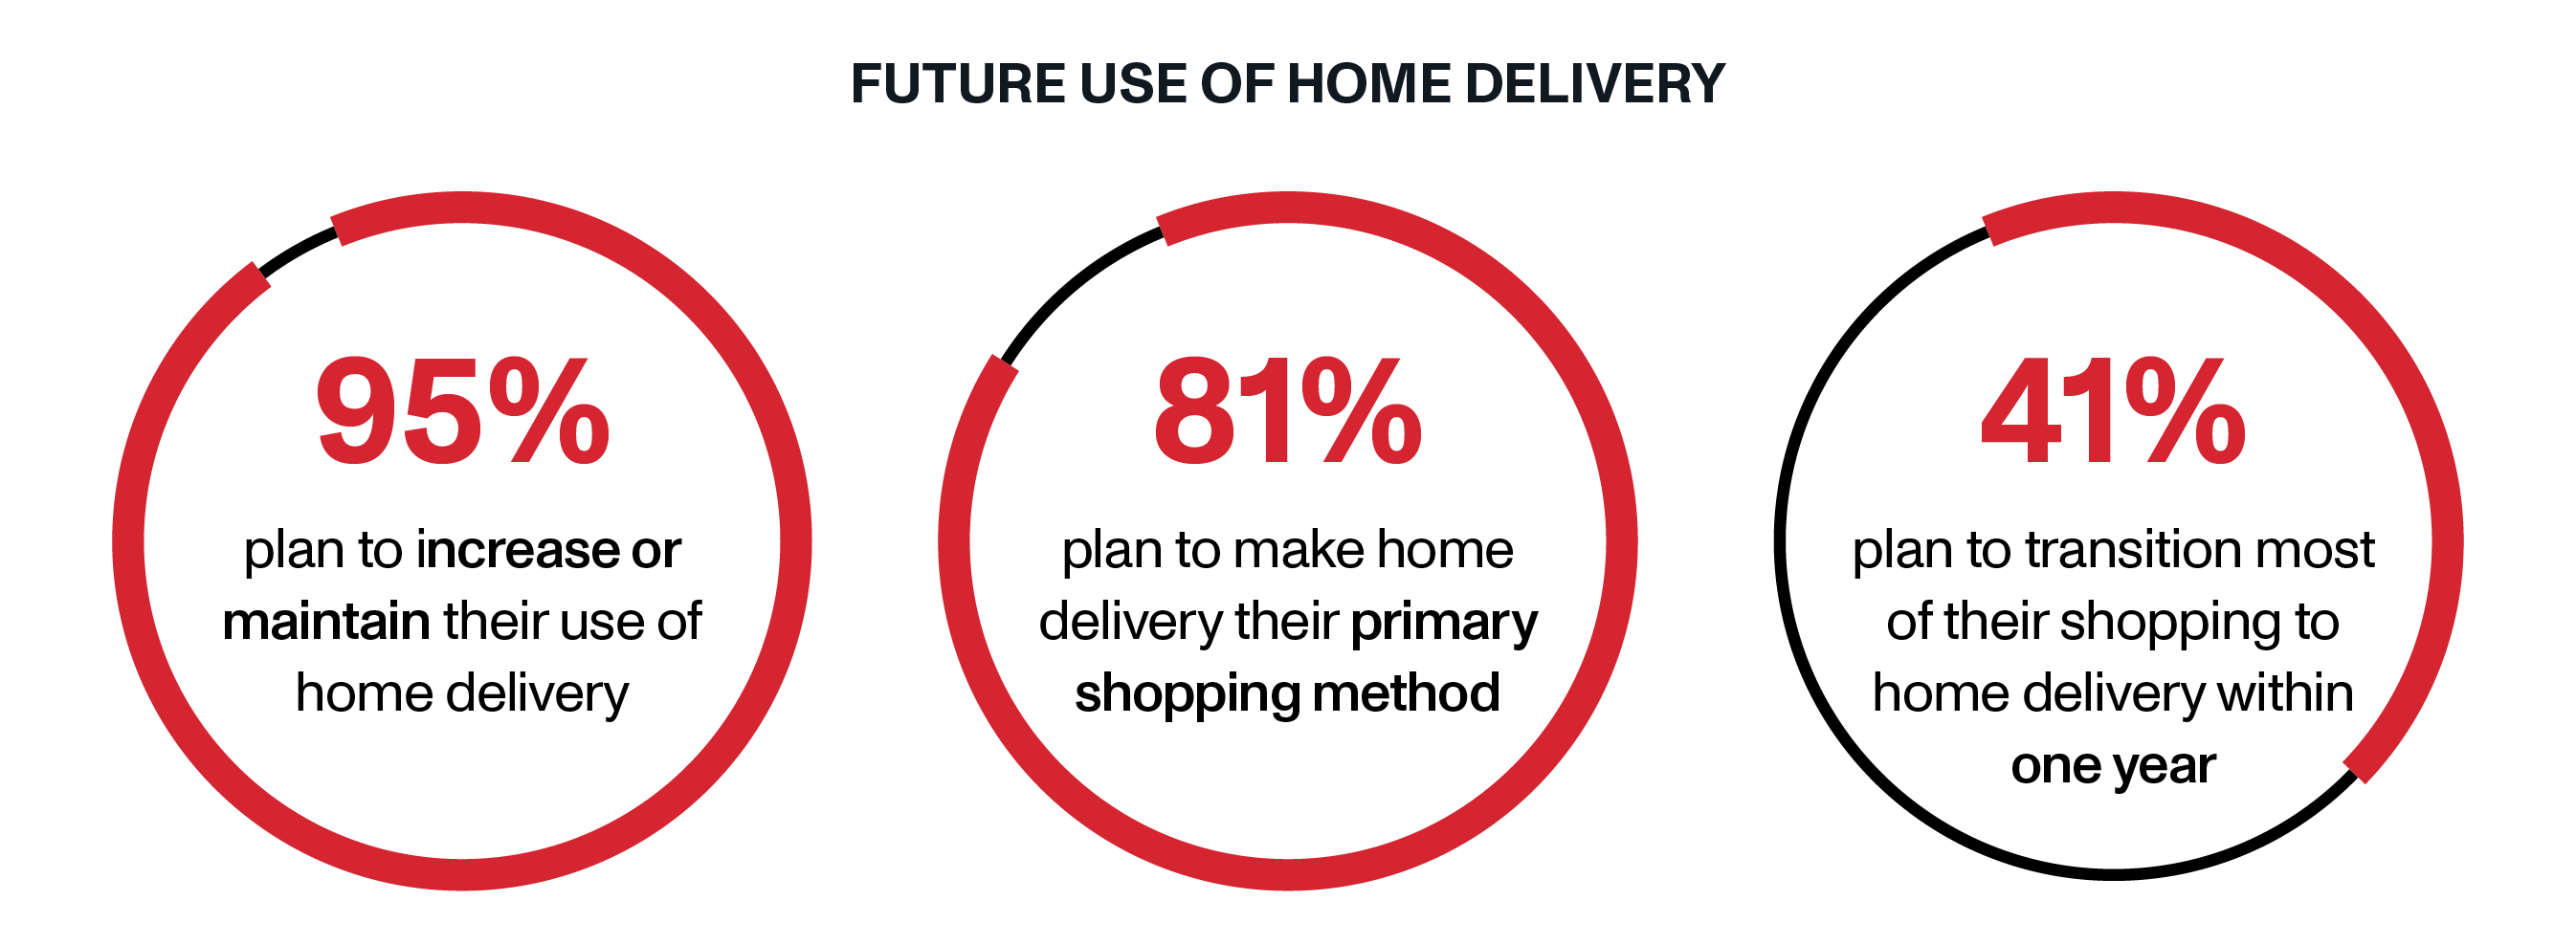 Future Use of Home Delivery | OnTrac Residential E-Commerce Delivery | Home Delivery vs. BOPIS: Which Strategy Helps Retailers Gain a Competitive Advantage?